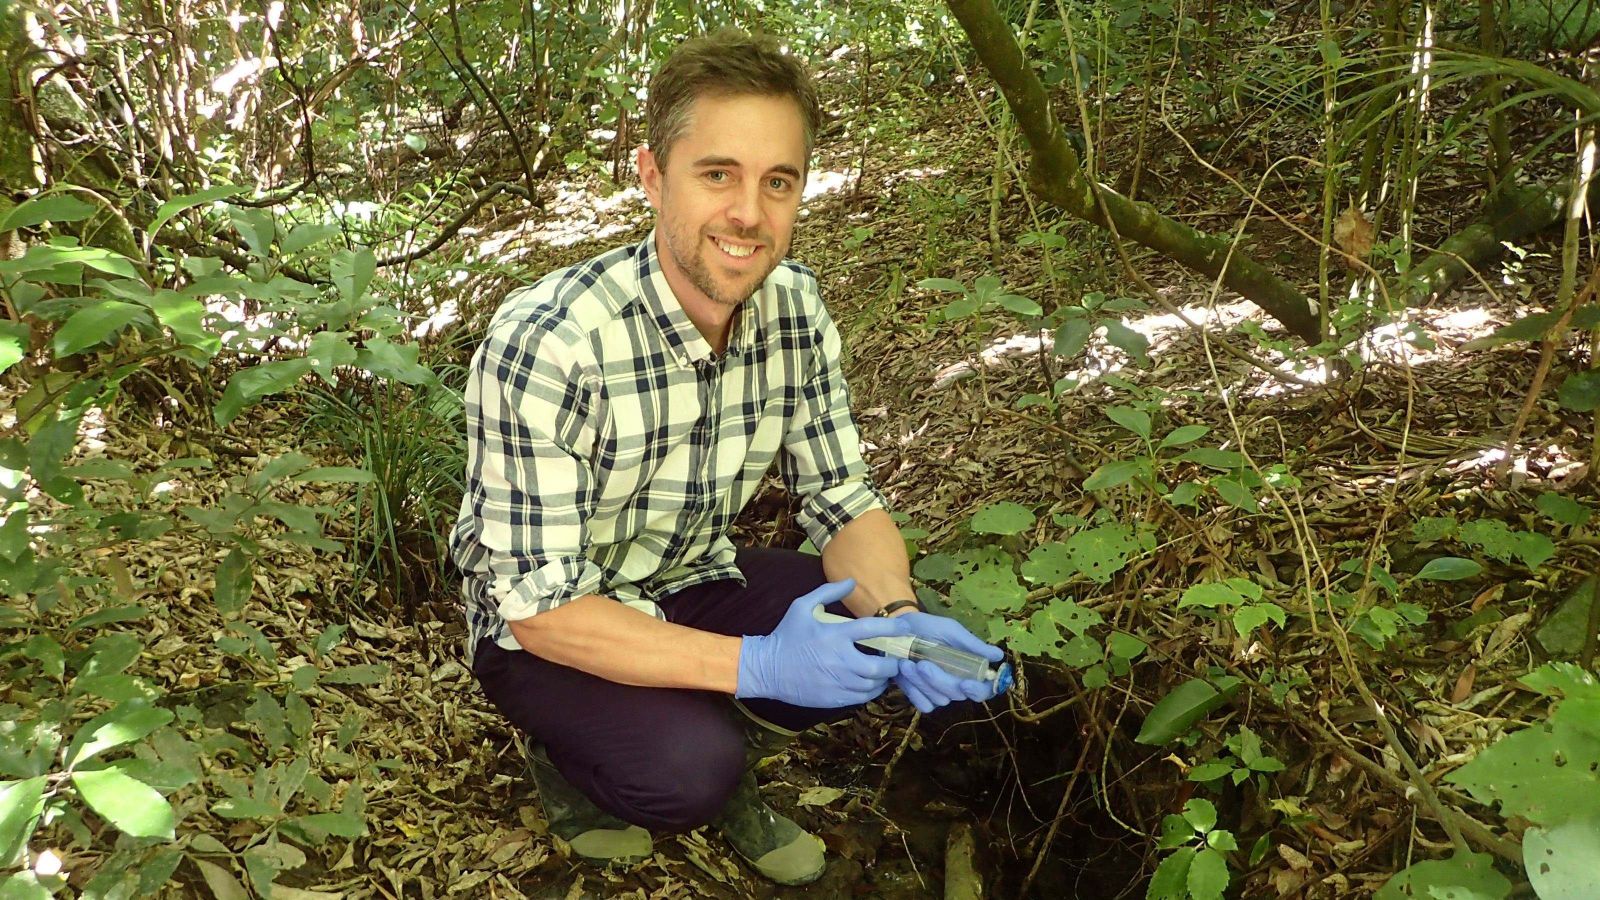 Shaun Wilkinson in the field, holding a syringe